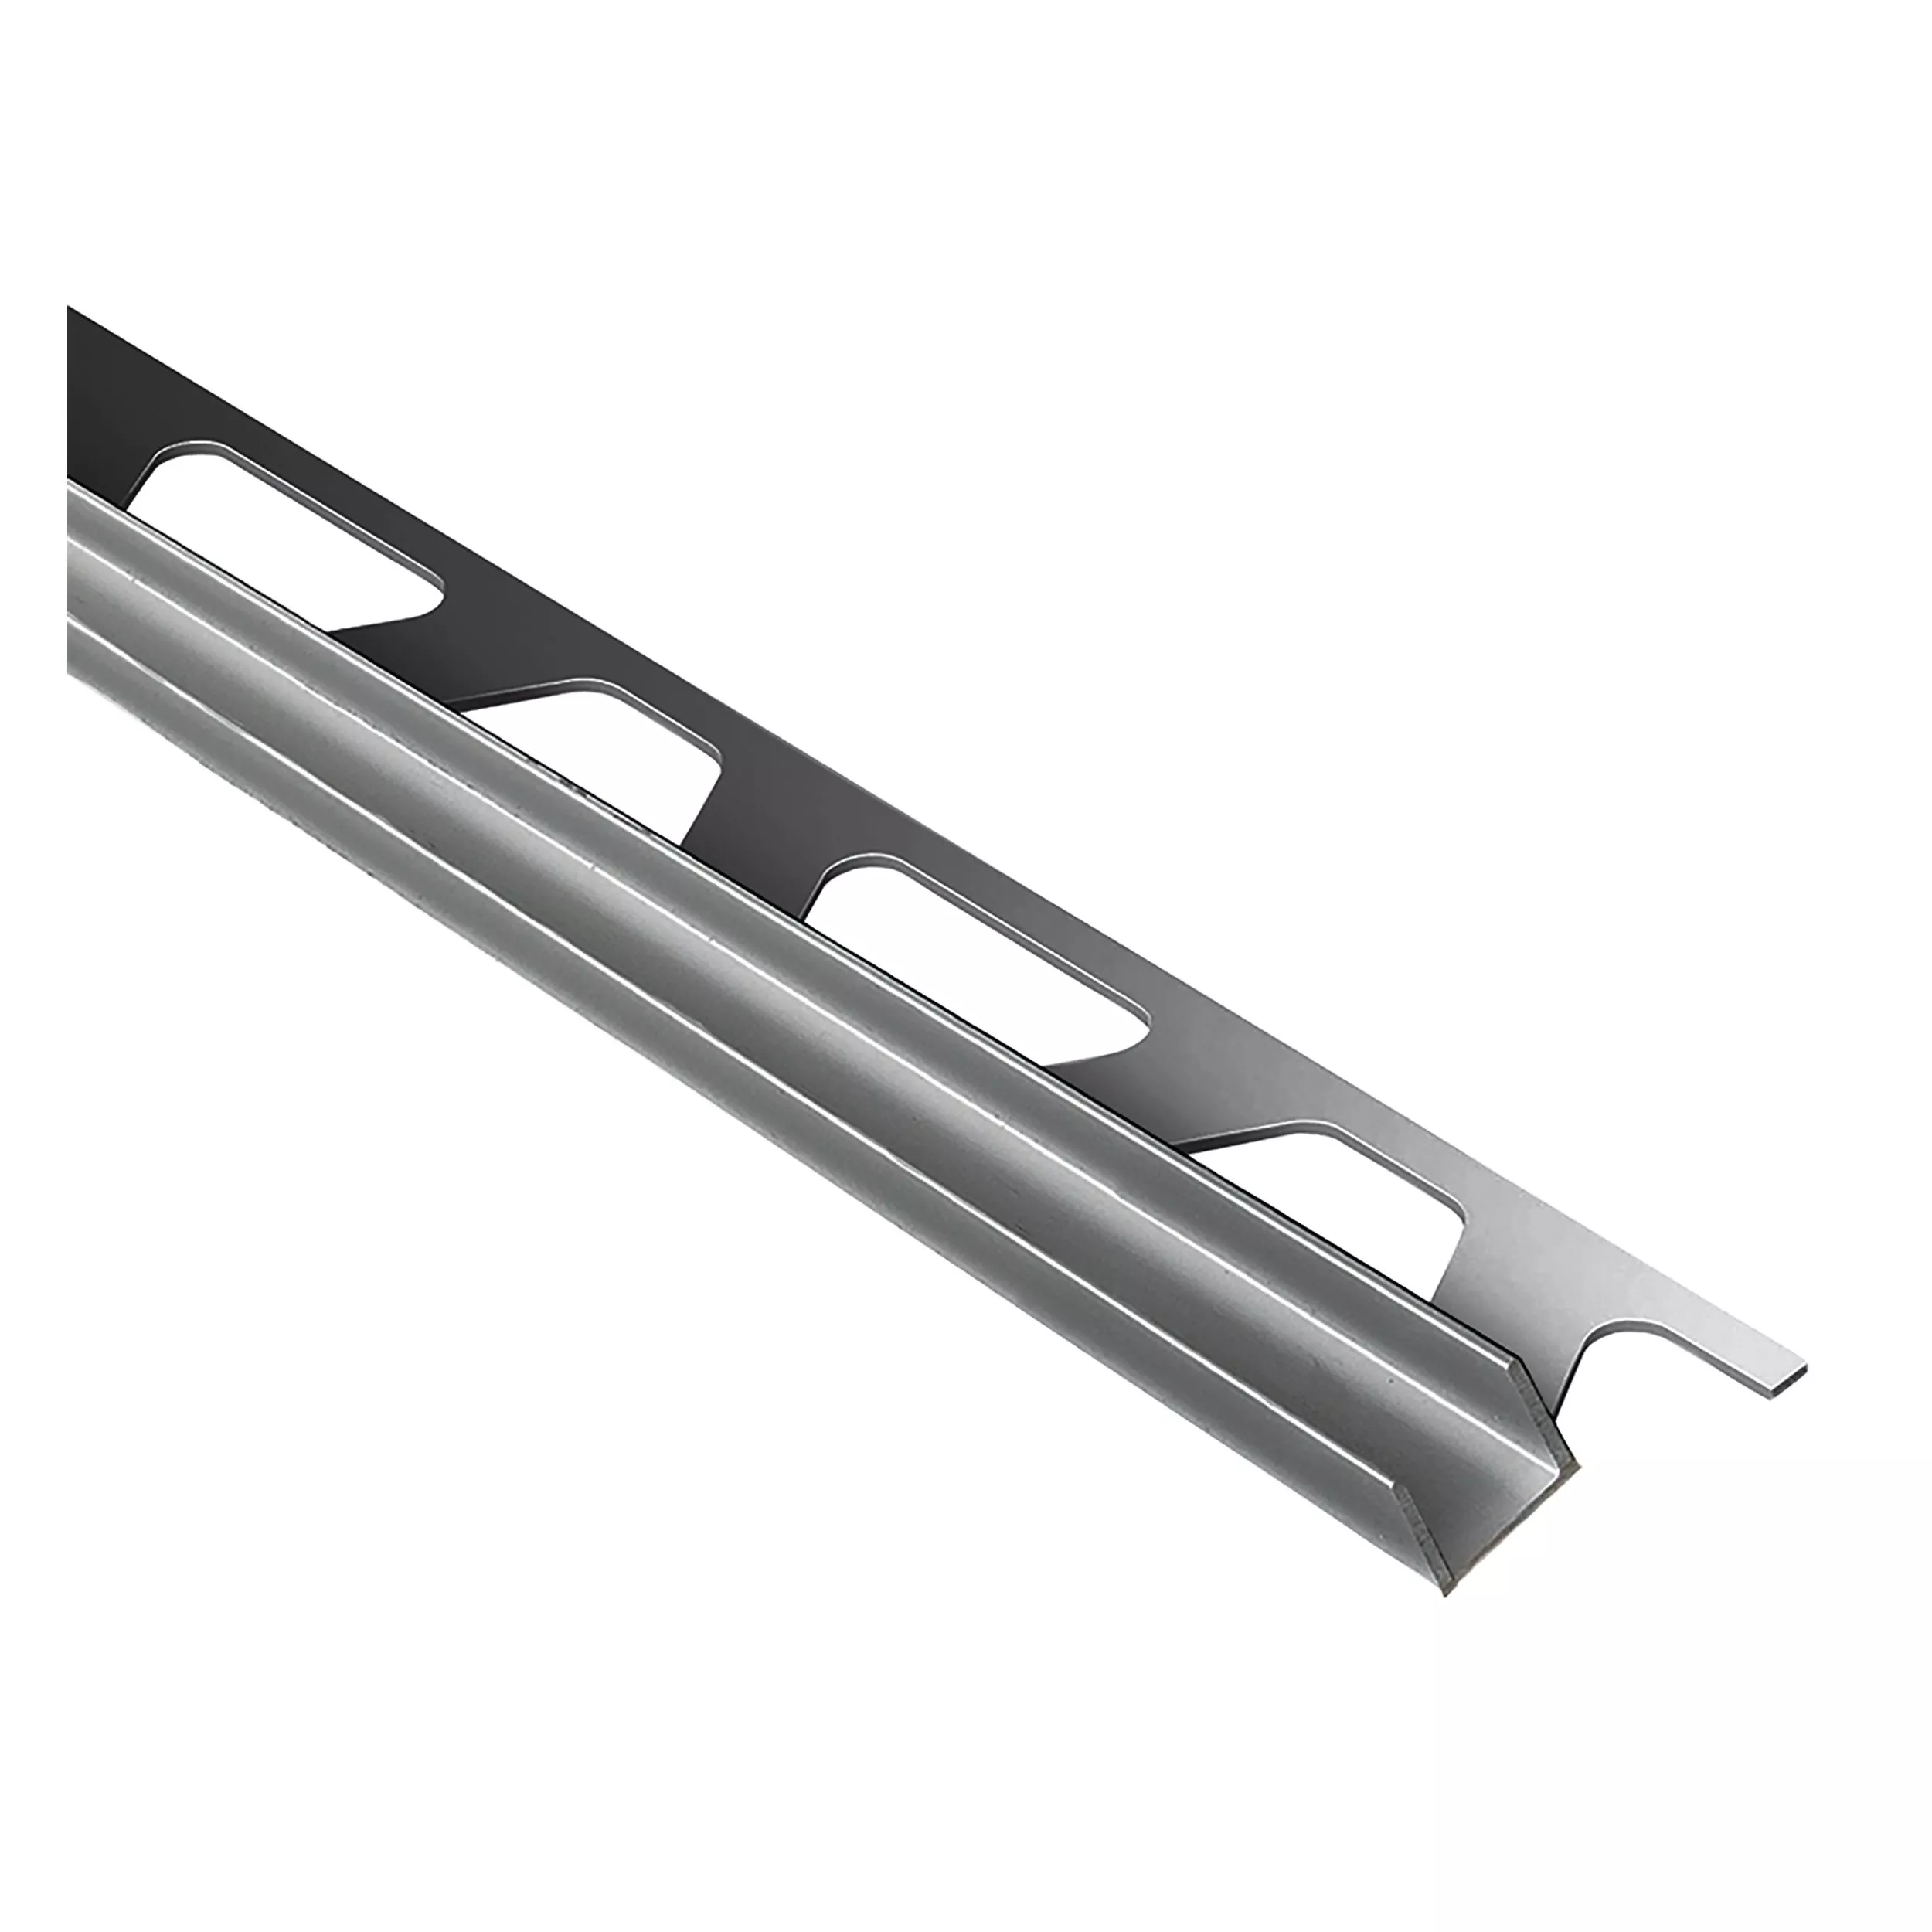 Schluter Deco-Sg 1/2in. Brushed Stainless Steel